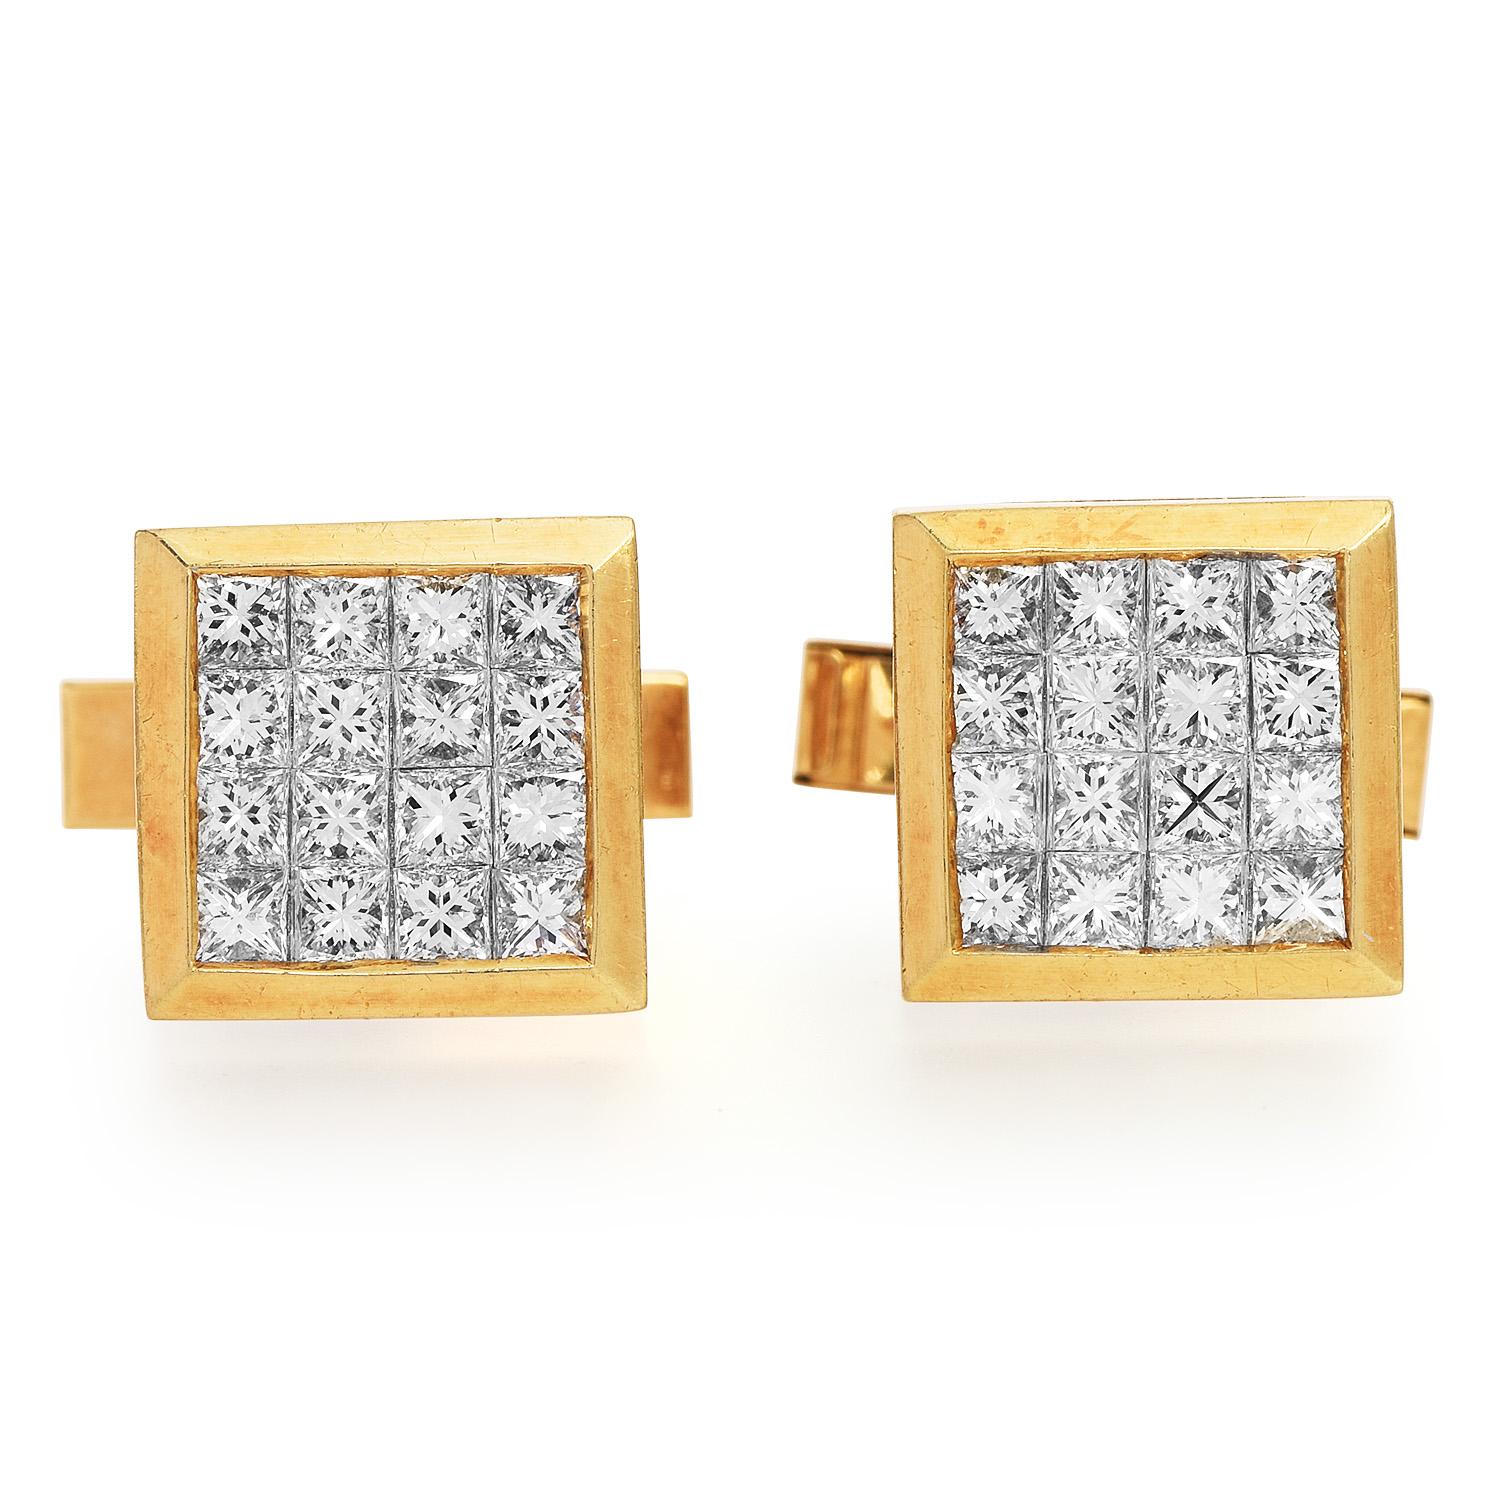 Vie to relive the past in these Exquisite, circa 1990s unisex cufflinks

Crafted in luxurious 18K Yellow Gold. 

From the Invisible set center, these cufflinks scream luxury and fashion from days gone by.

Adorning the façade of these are (32)